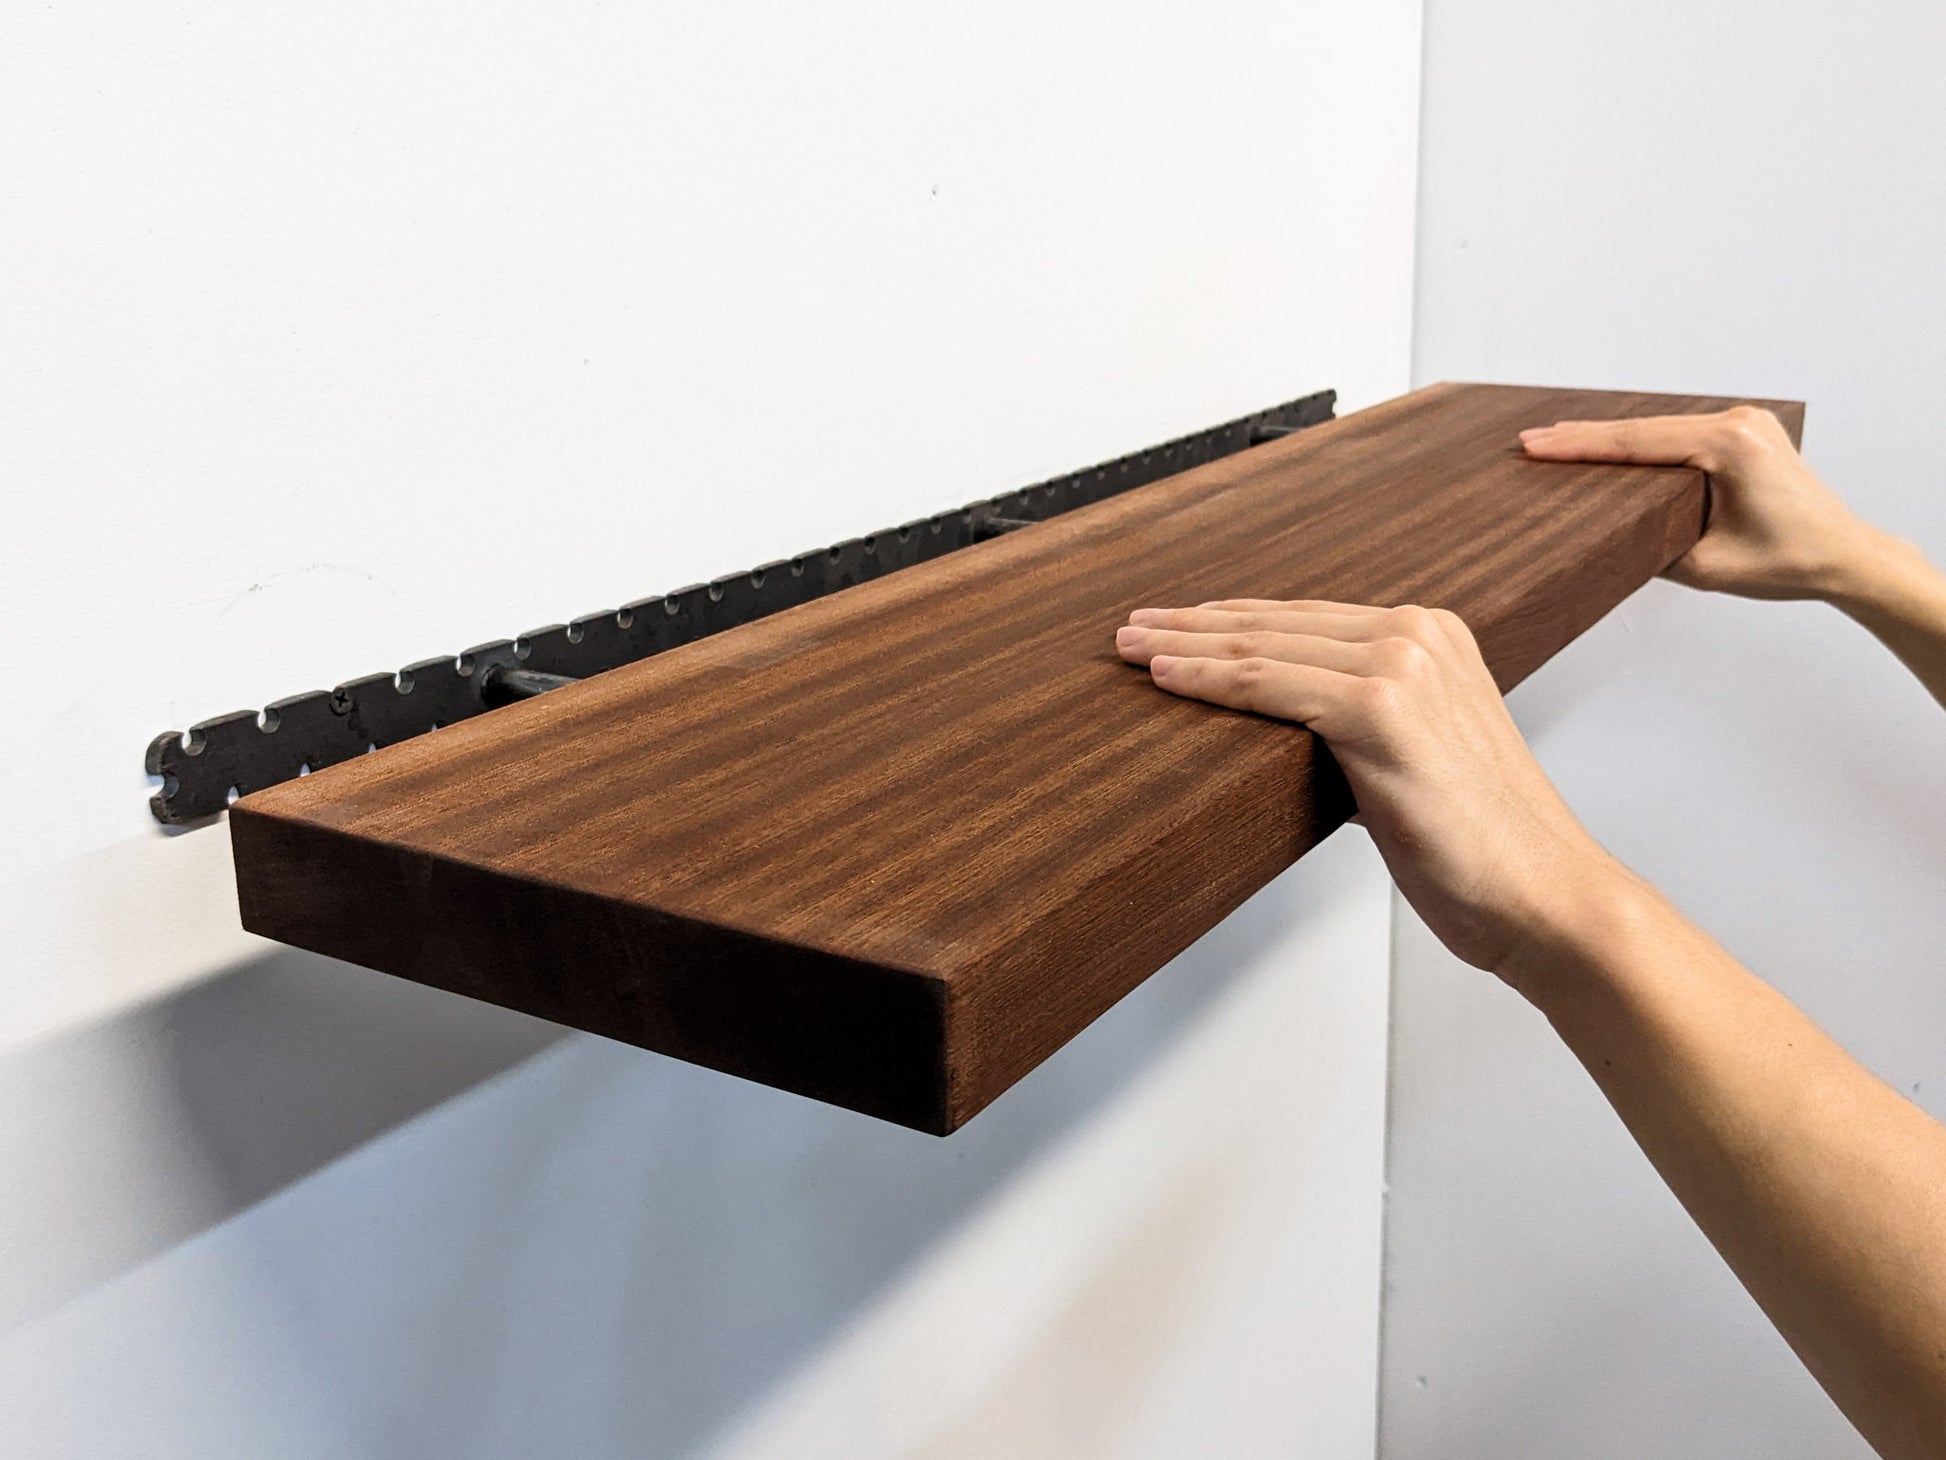 An extra-long, heavy-duty mahogany floating shelf is sucessfully installed and sits securely on a wall. Two hands grip the top and bottom of the front-facing side. 